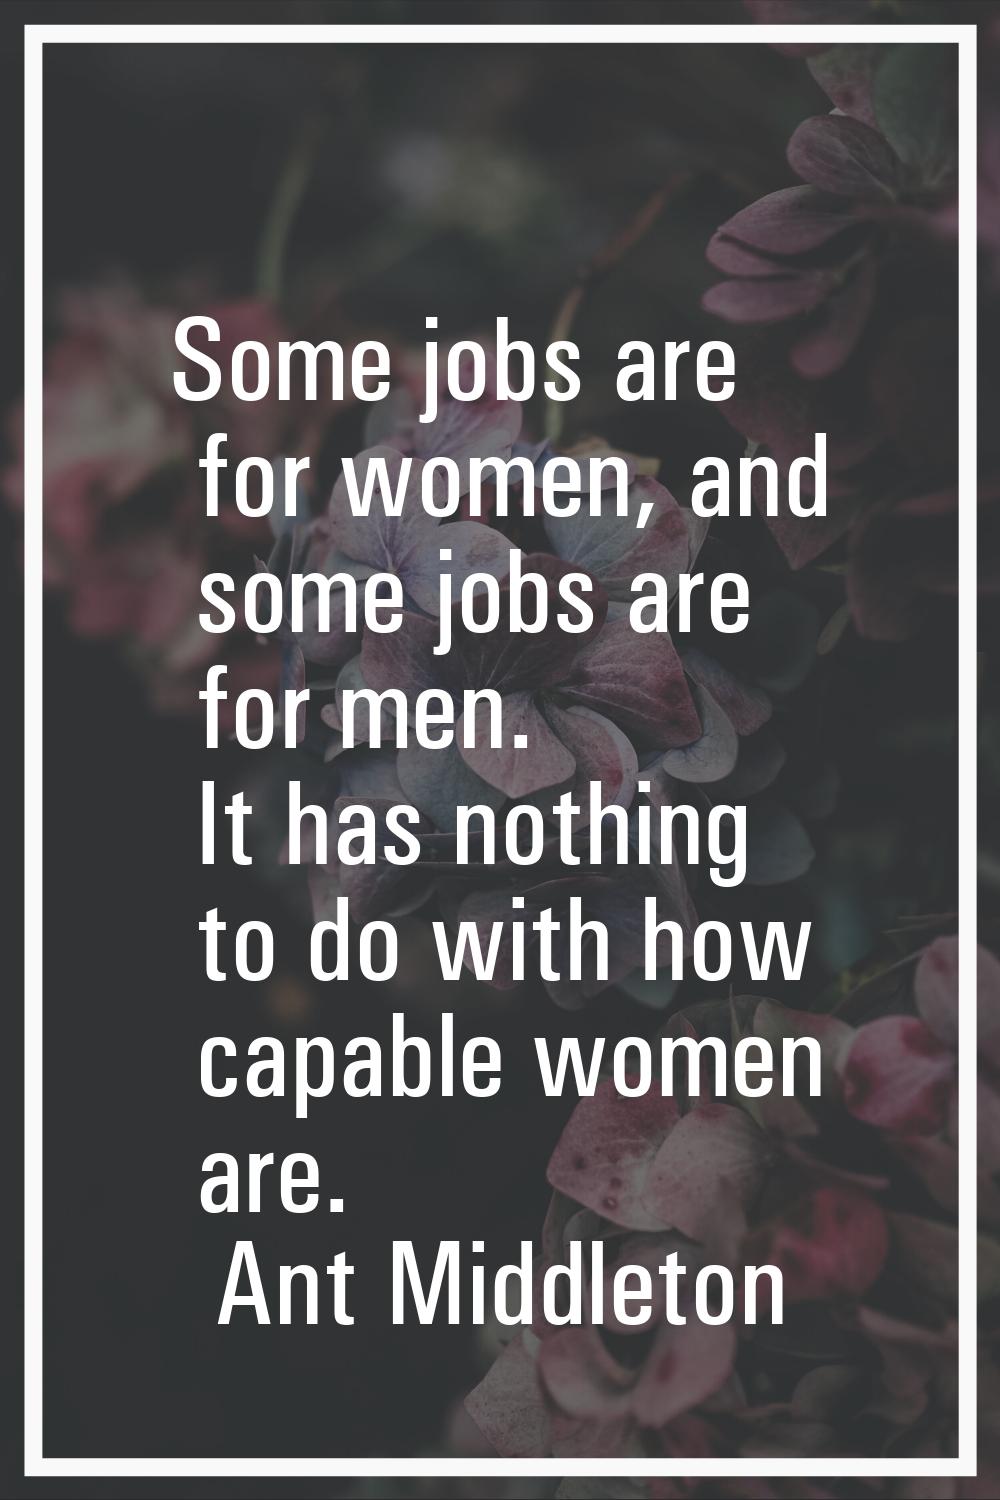 Some jobs are for women, and some jobs are for men. It has nothing to do with how capable women are